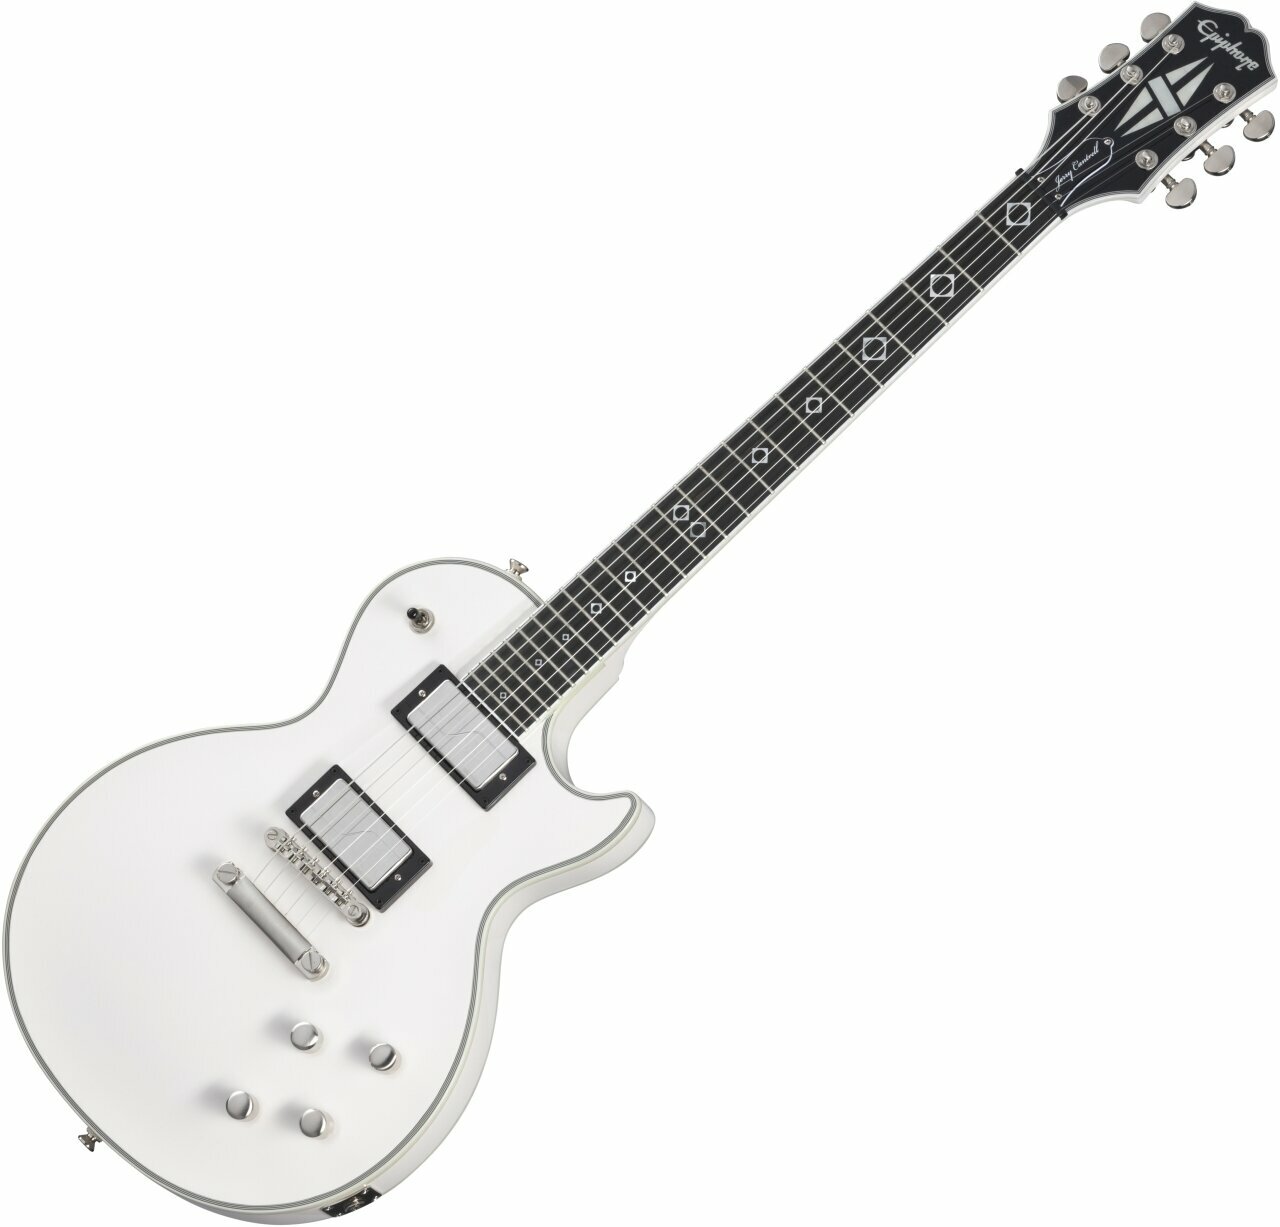 Epiphone Jerry Cantrell Prophecy Les Paul Custom Bone White Epiphone